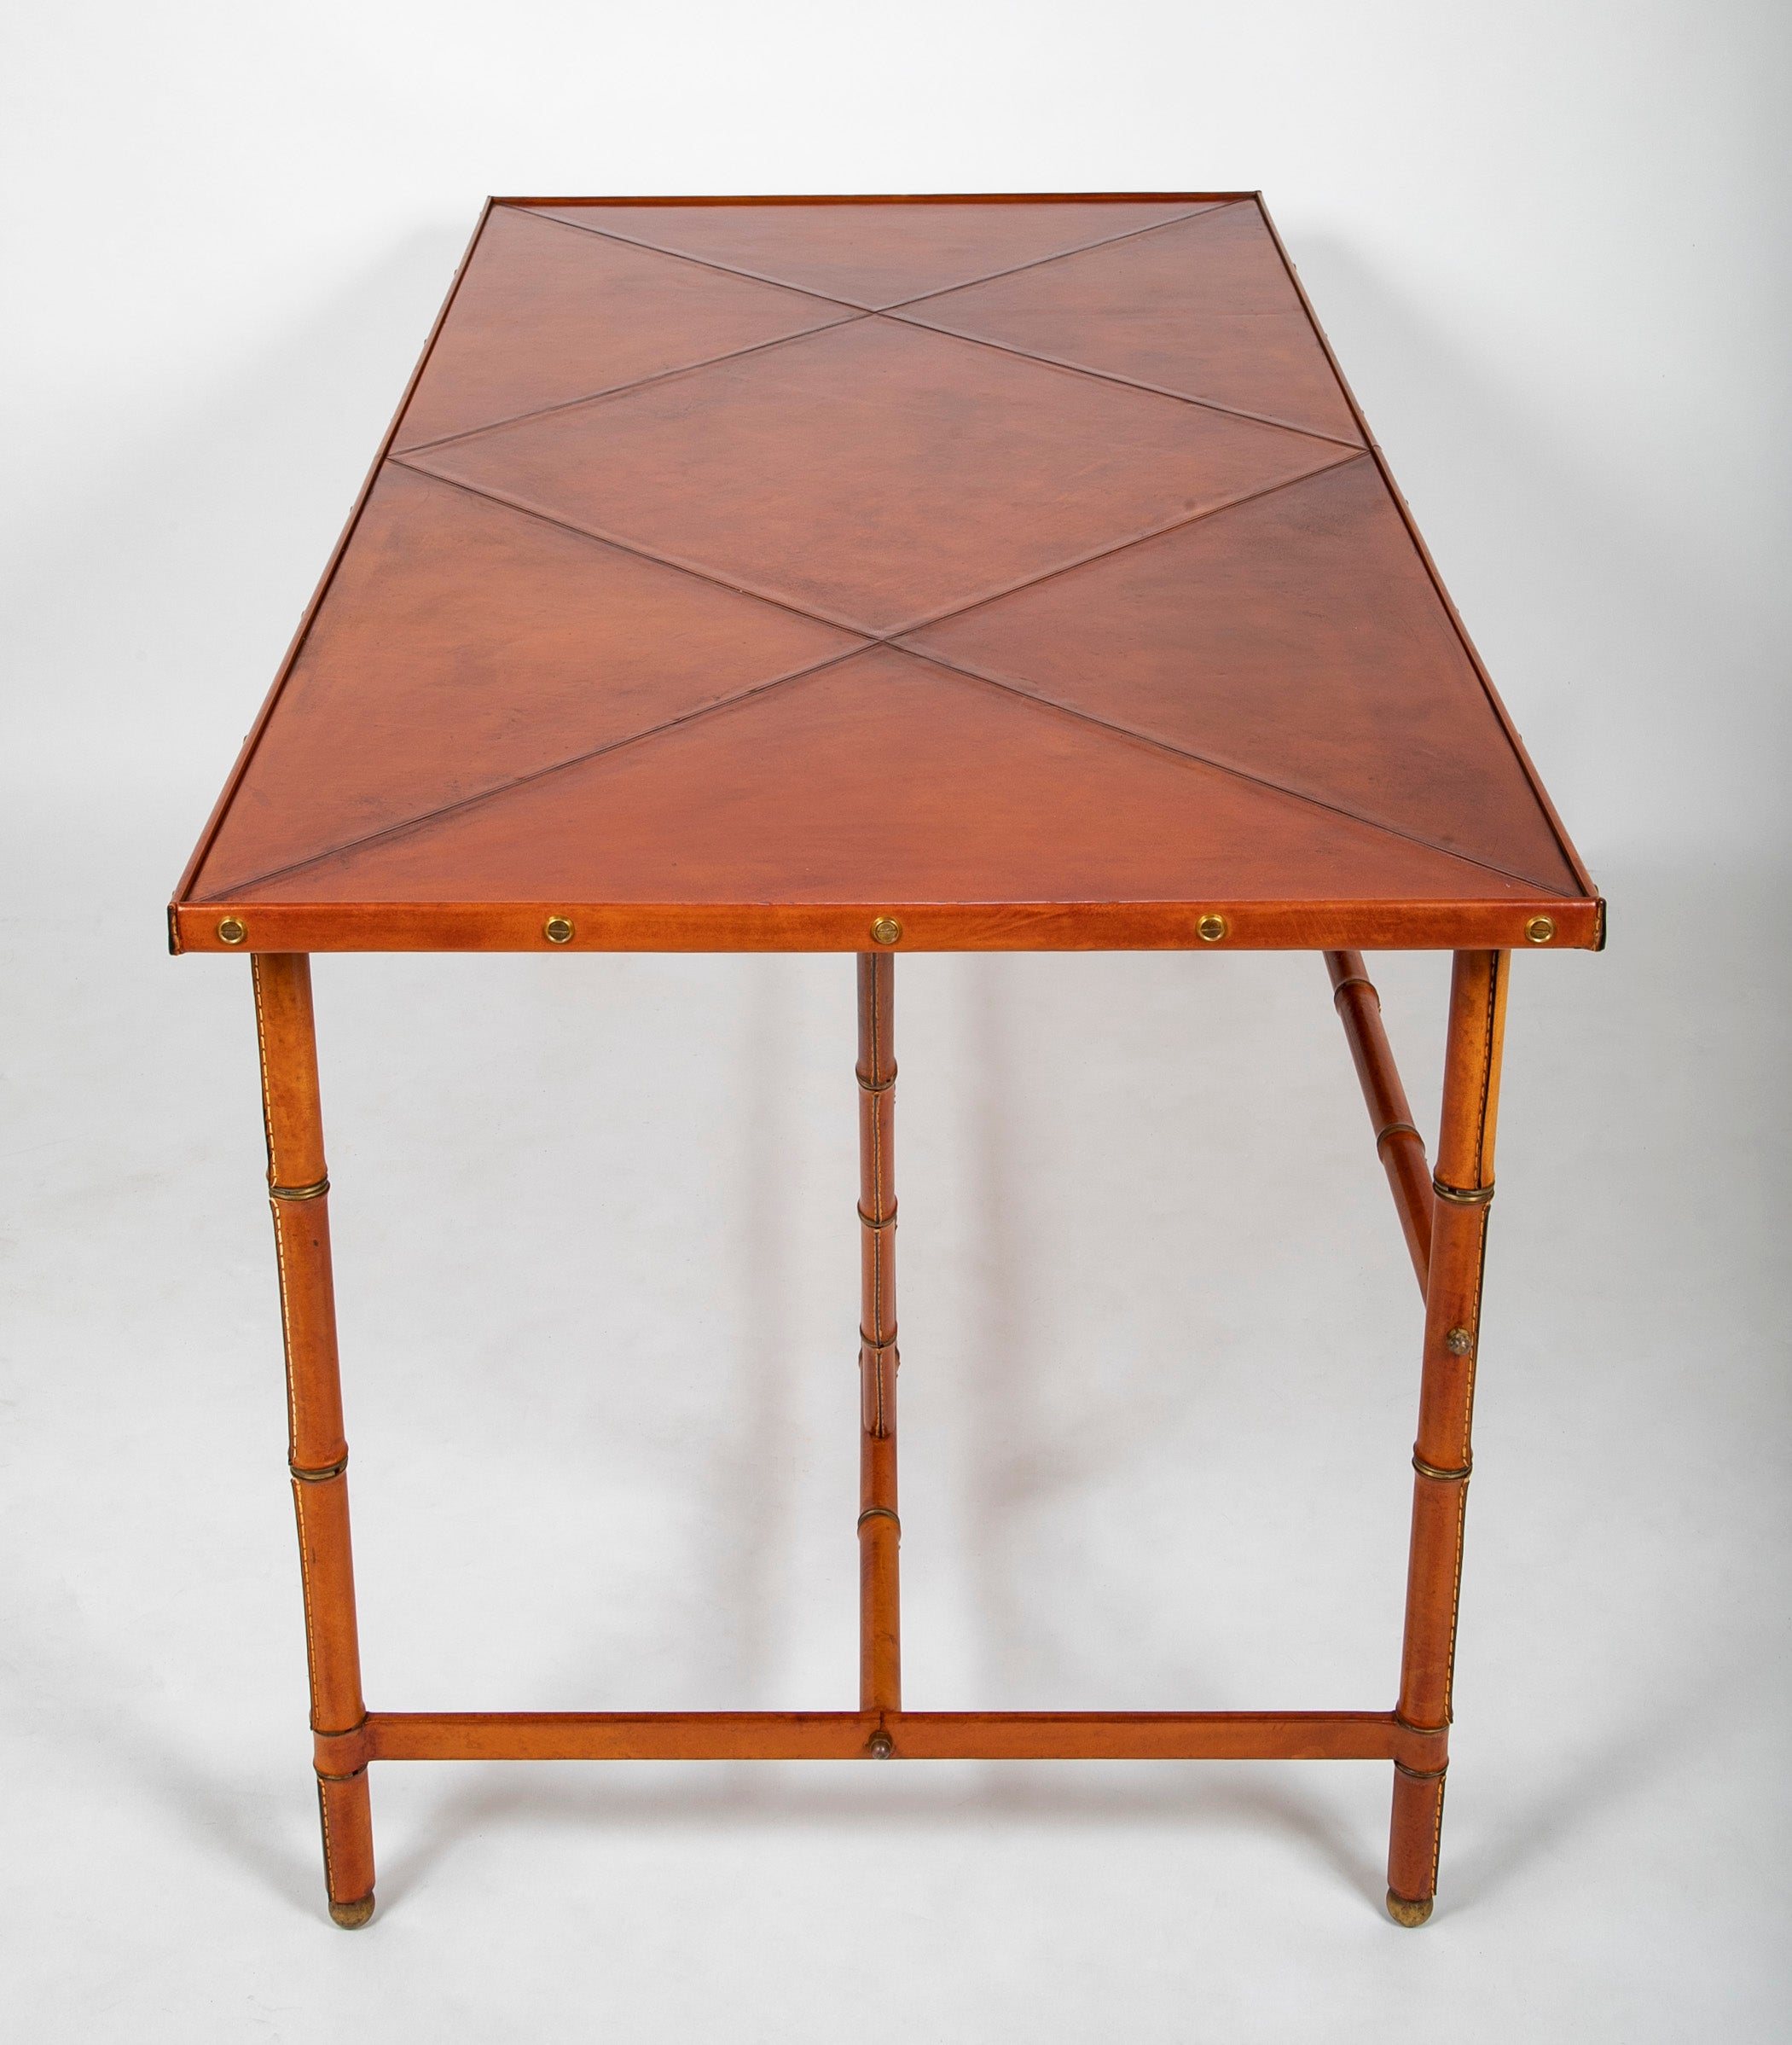 Jacques Adnet Desk of Saddle Stitched Leather over Steel